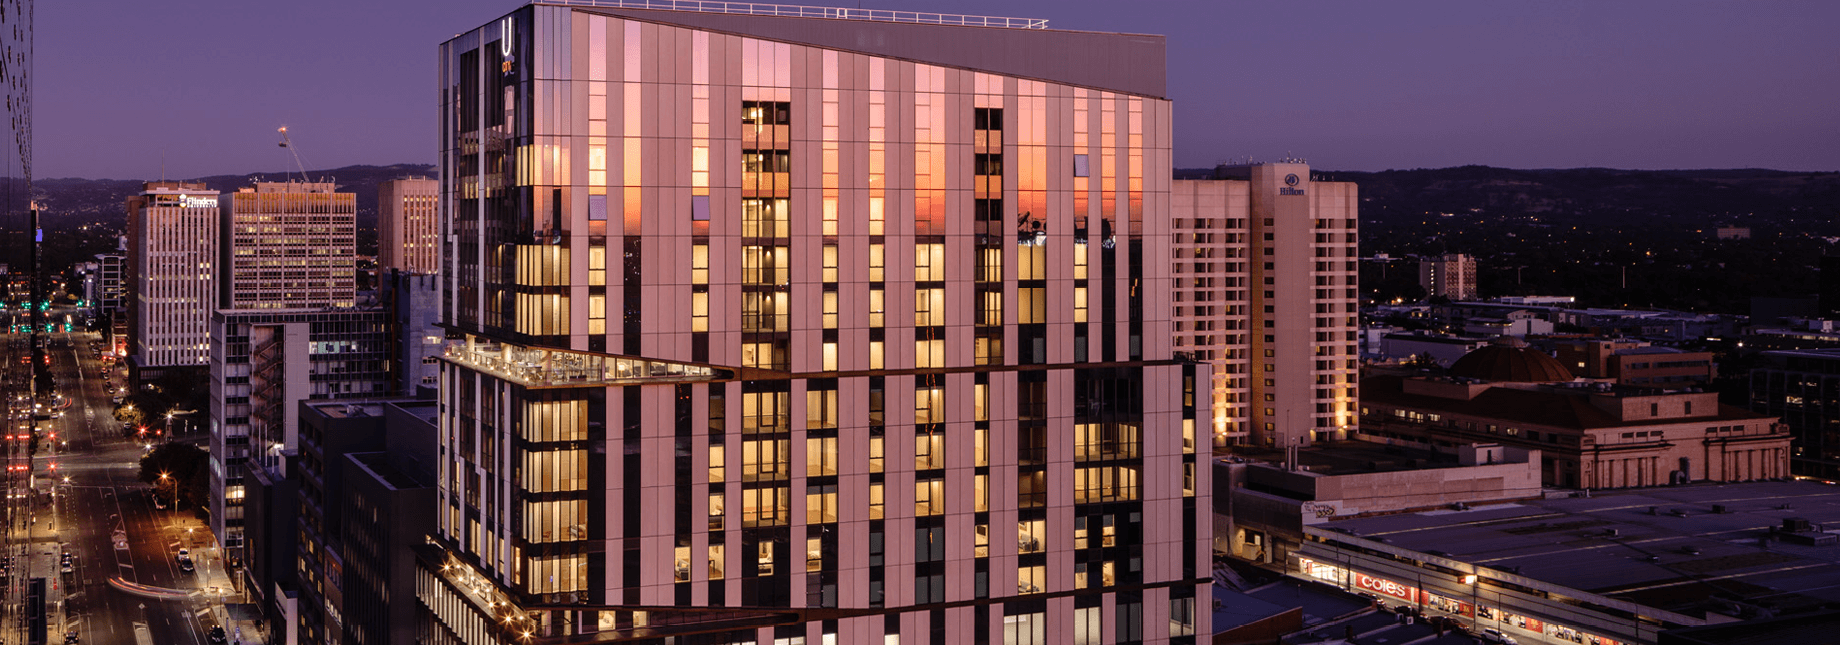 u city building at night time